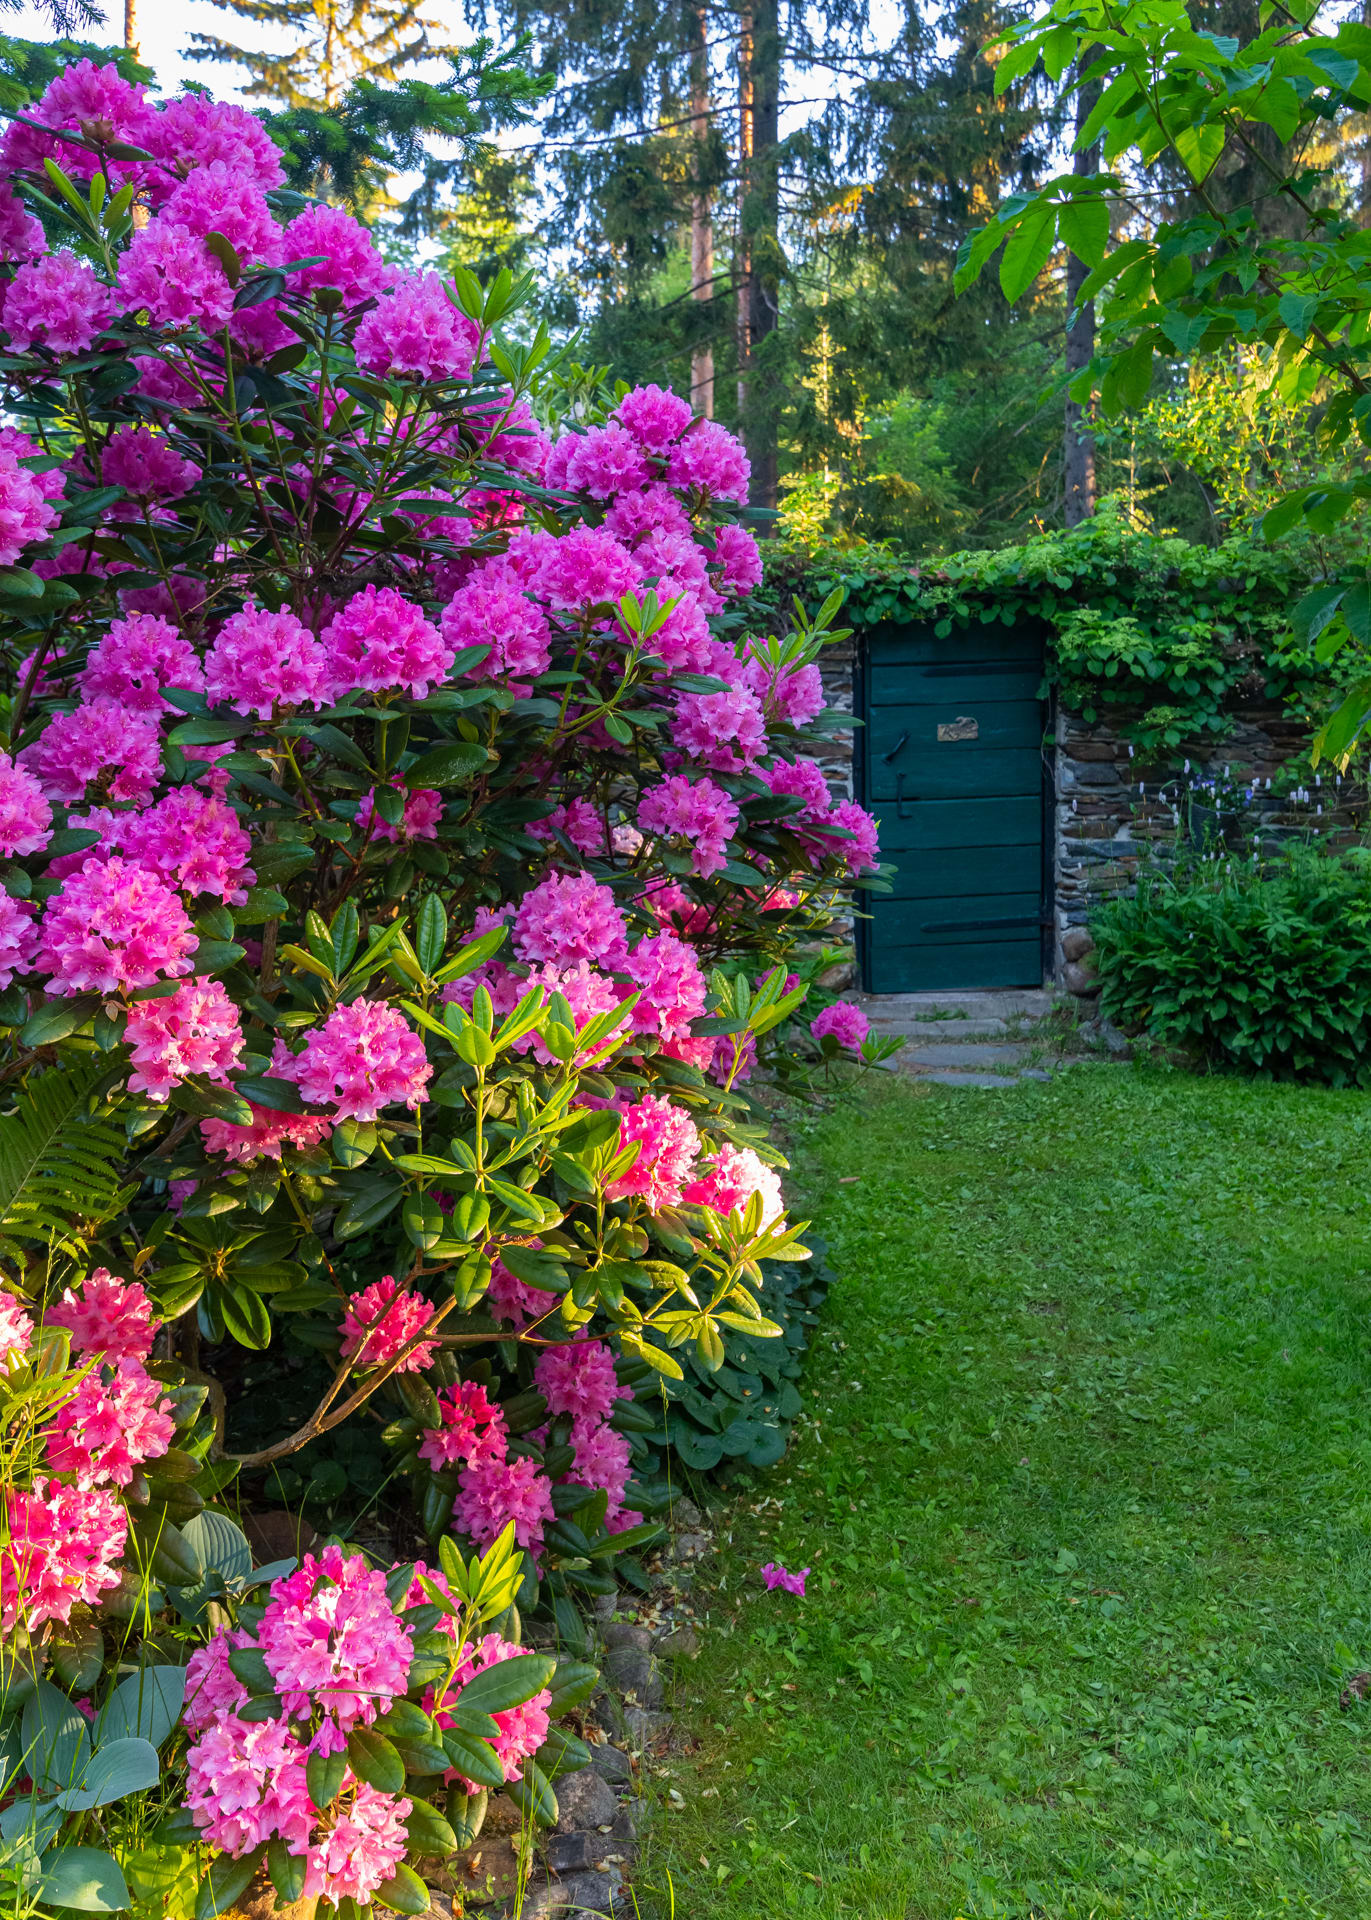 pink rhododendron in the front and a stone entrance wall in the background